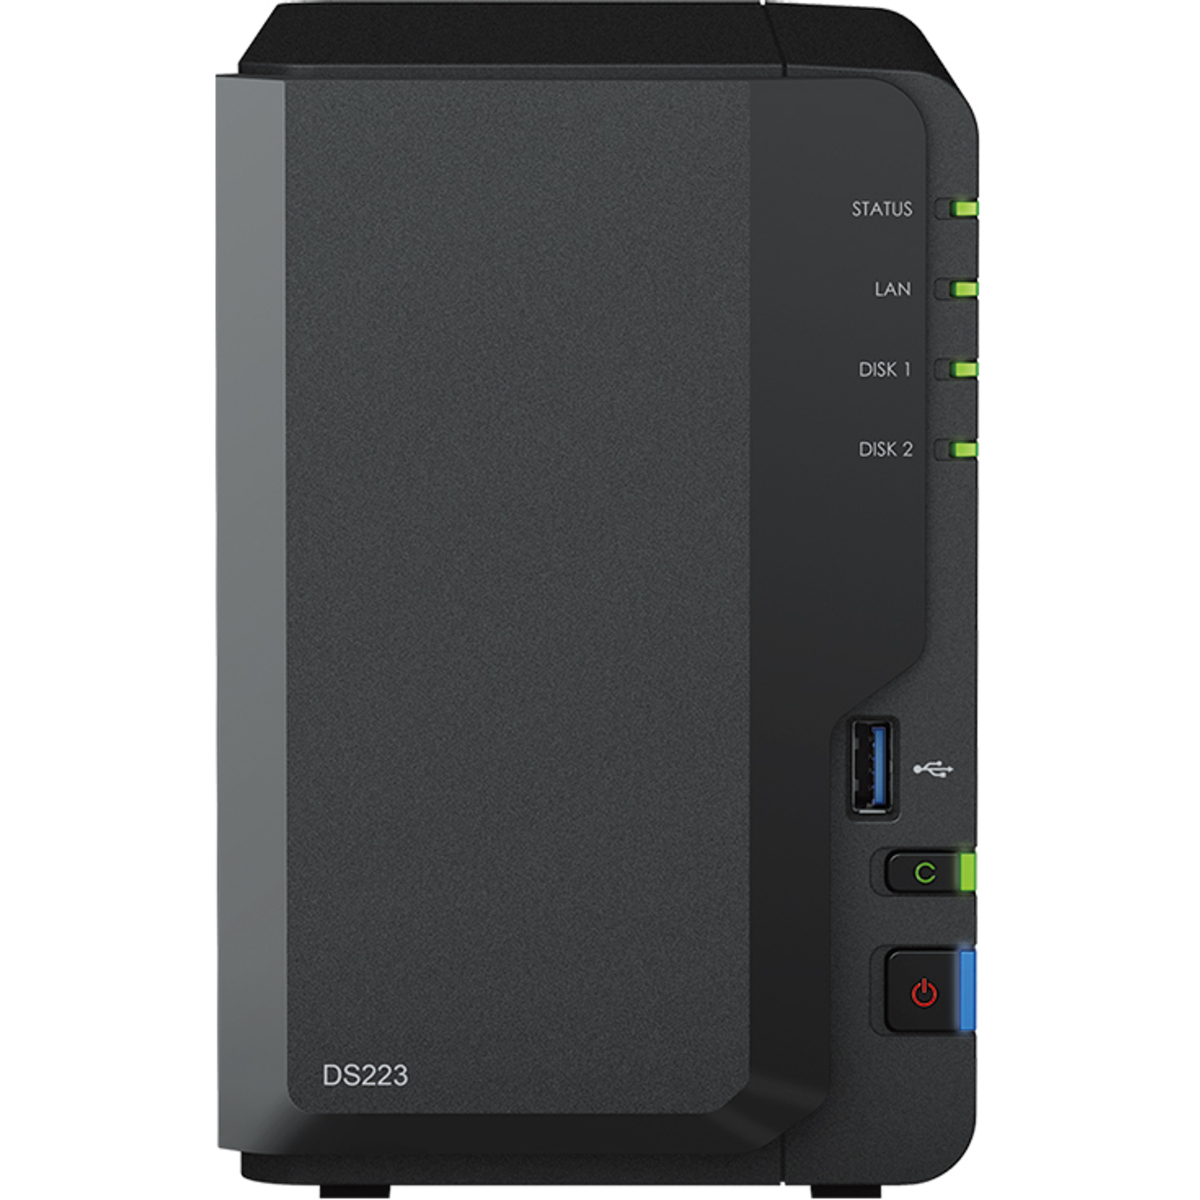 Synology DiskStation DS223 12tb 2-Bay Desktop Personal / Basic Home / Small Office NAS - Network Attached Storage Device 1x12tb Synology Plus Series HAT3310-12T 3.5 7200rpm SATA 6Gb/s HDD NAS Class Drives Installed - Burn-In Tested DiskStation DS223